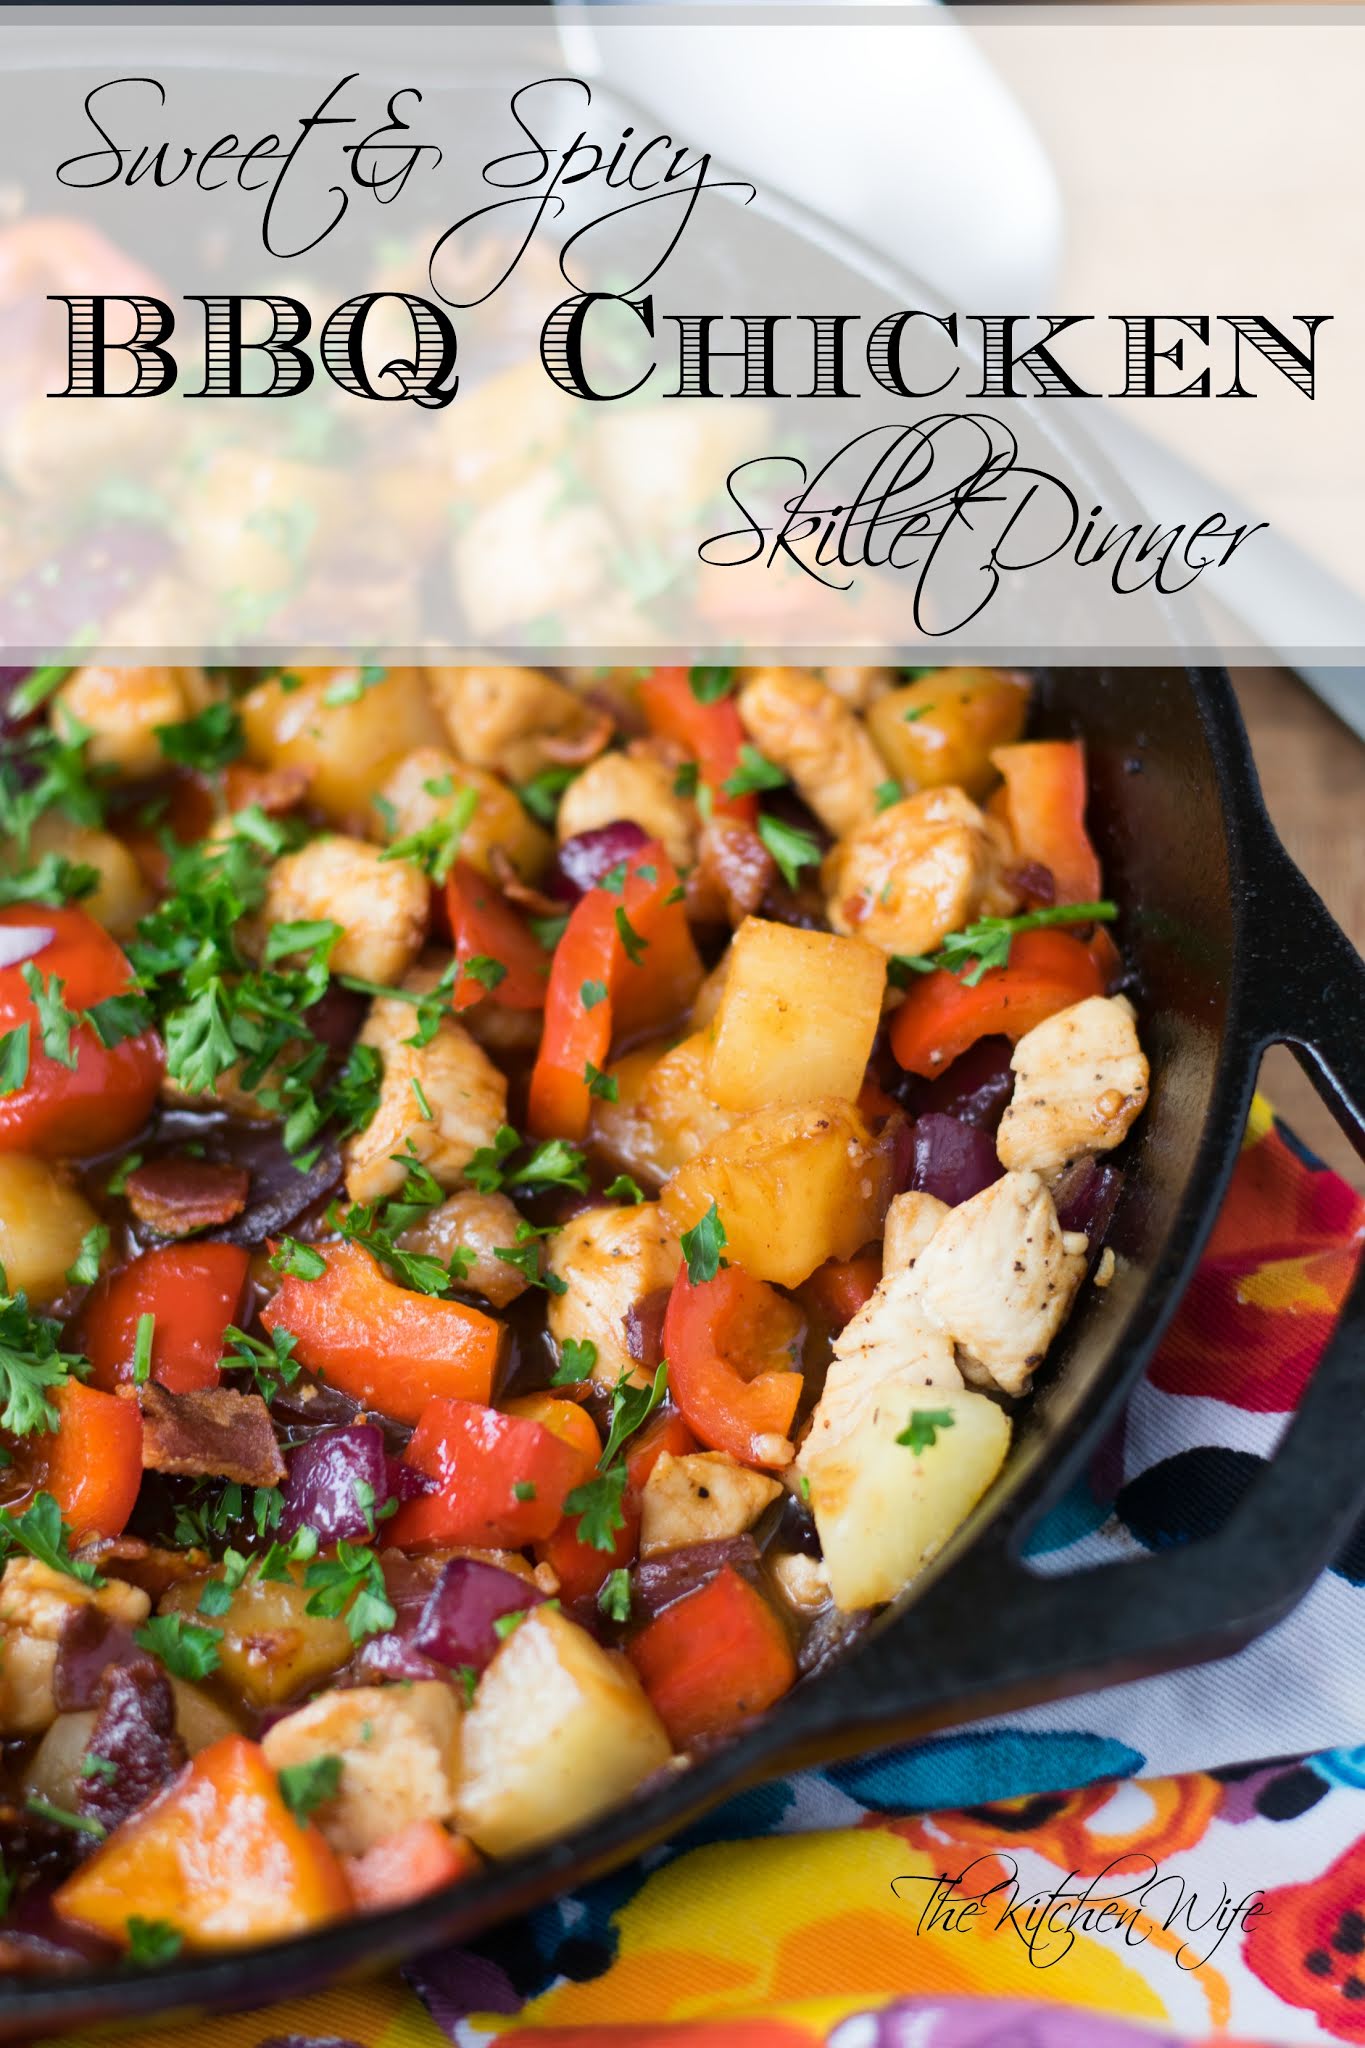 Sweet and Spicy BBQ Chicken Skillet Dinner Recipe